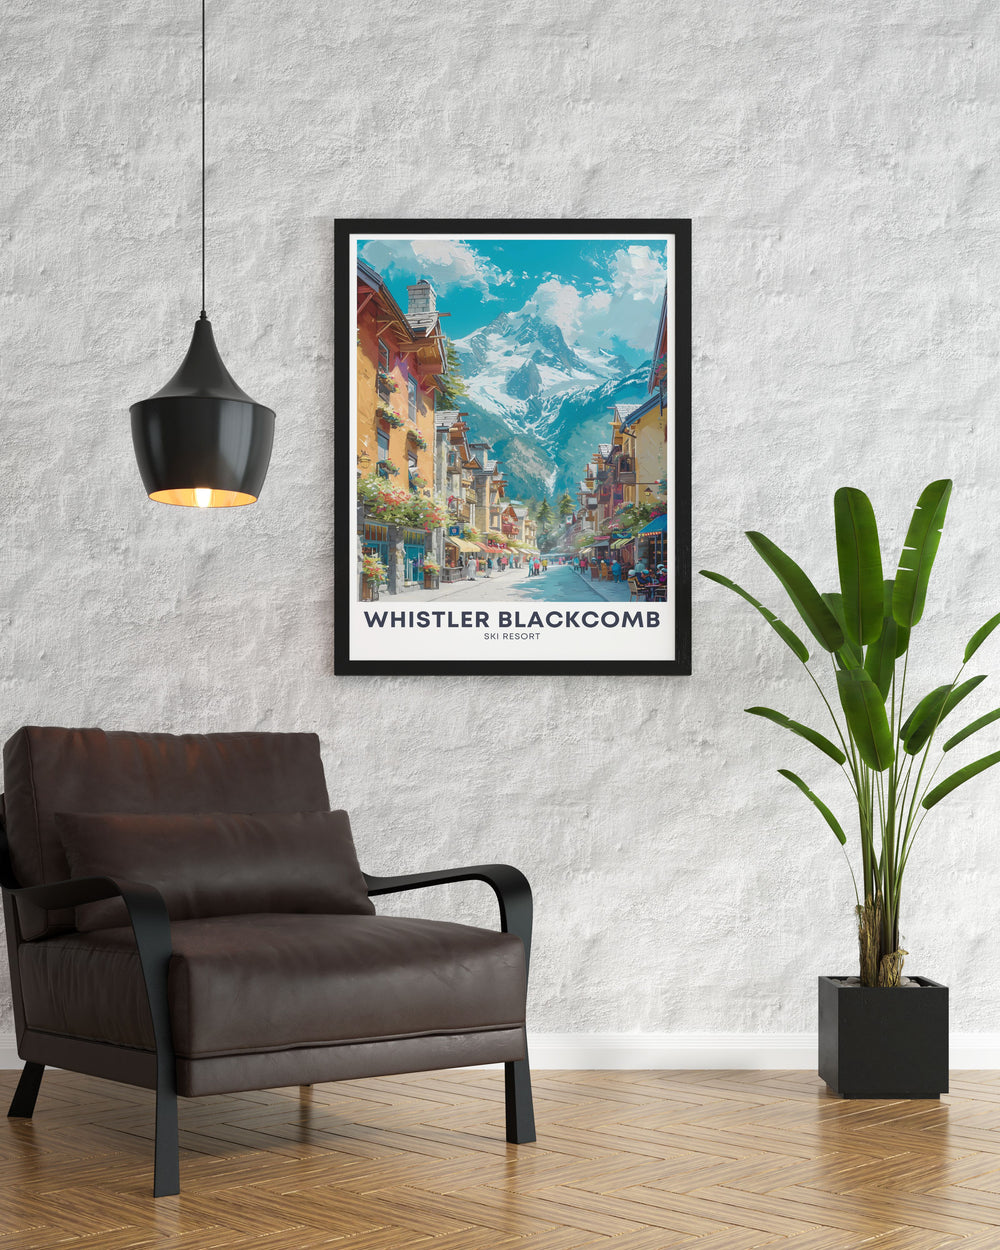 Whistler village prints depicting the charming pedestrian streets and breathtaking mountain backdrop of Whistler Blackcomb, ideal for winter sports enthusiasts and art lovers.